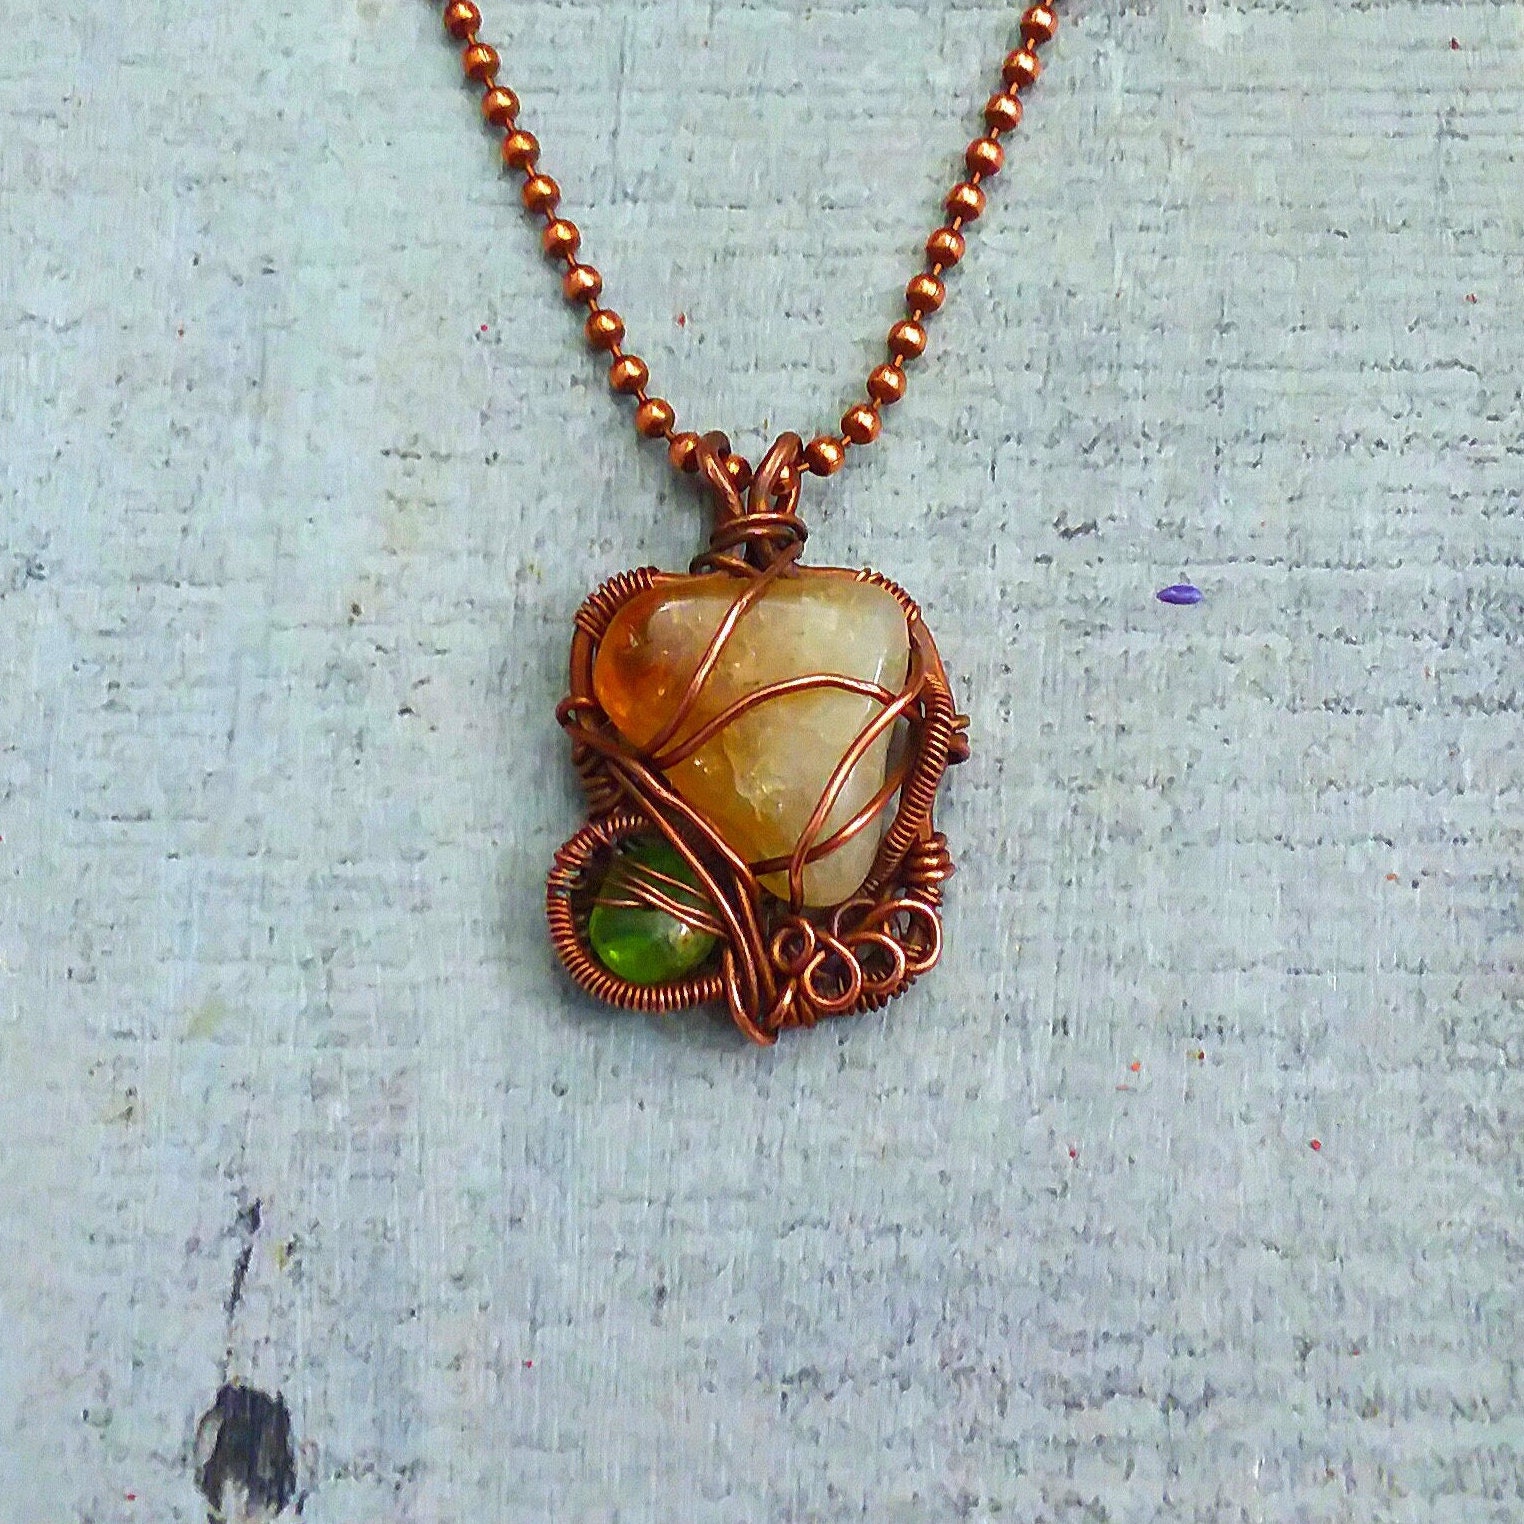 Copper Wire Wrapped Necklace citrine tumbled stone & peridot | Etsy